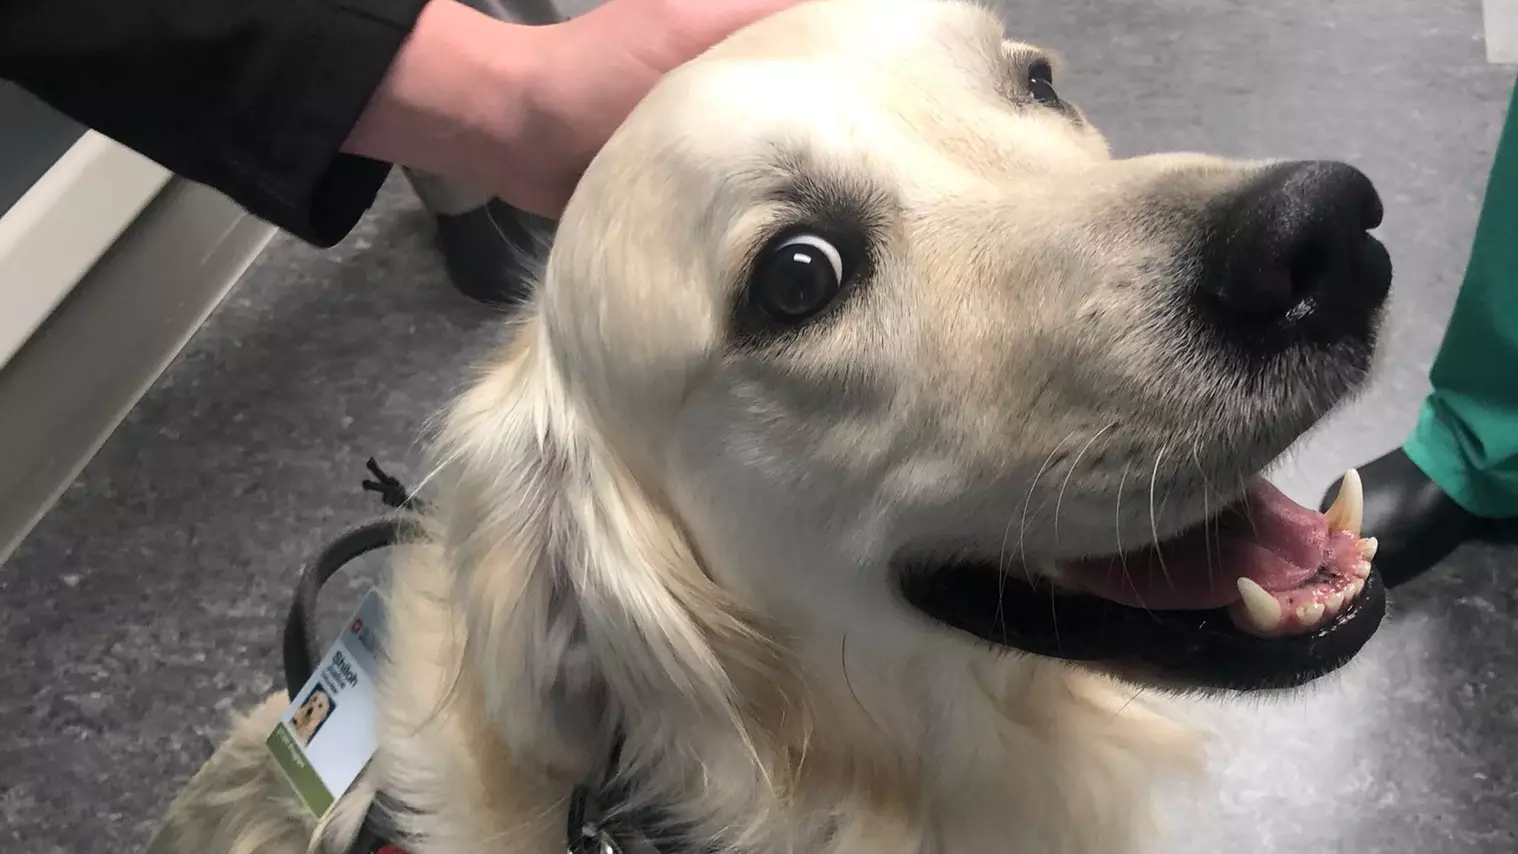 Hospital Hires Comfort Dog As Employee To 'Greet' Patients